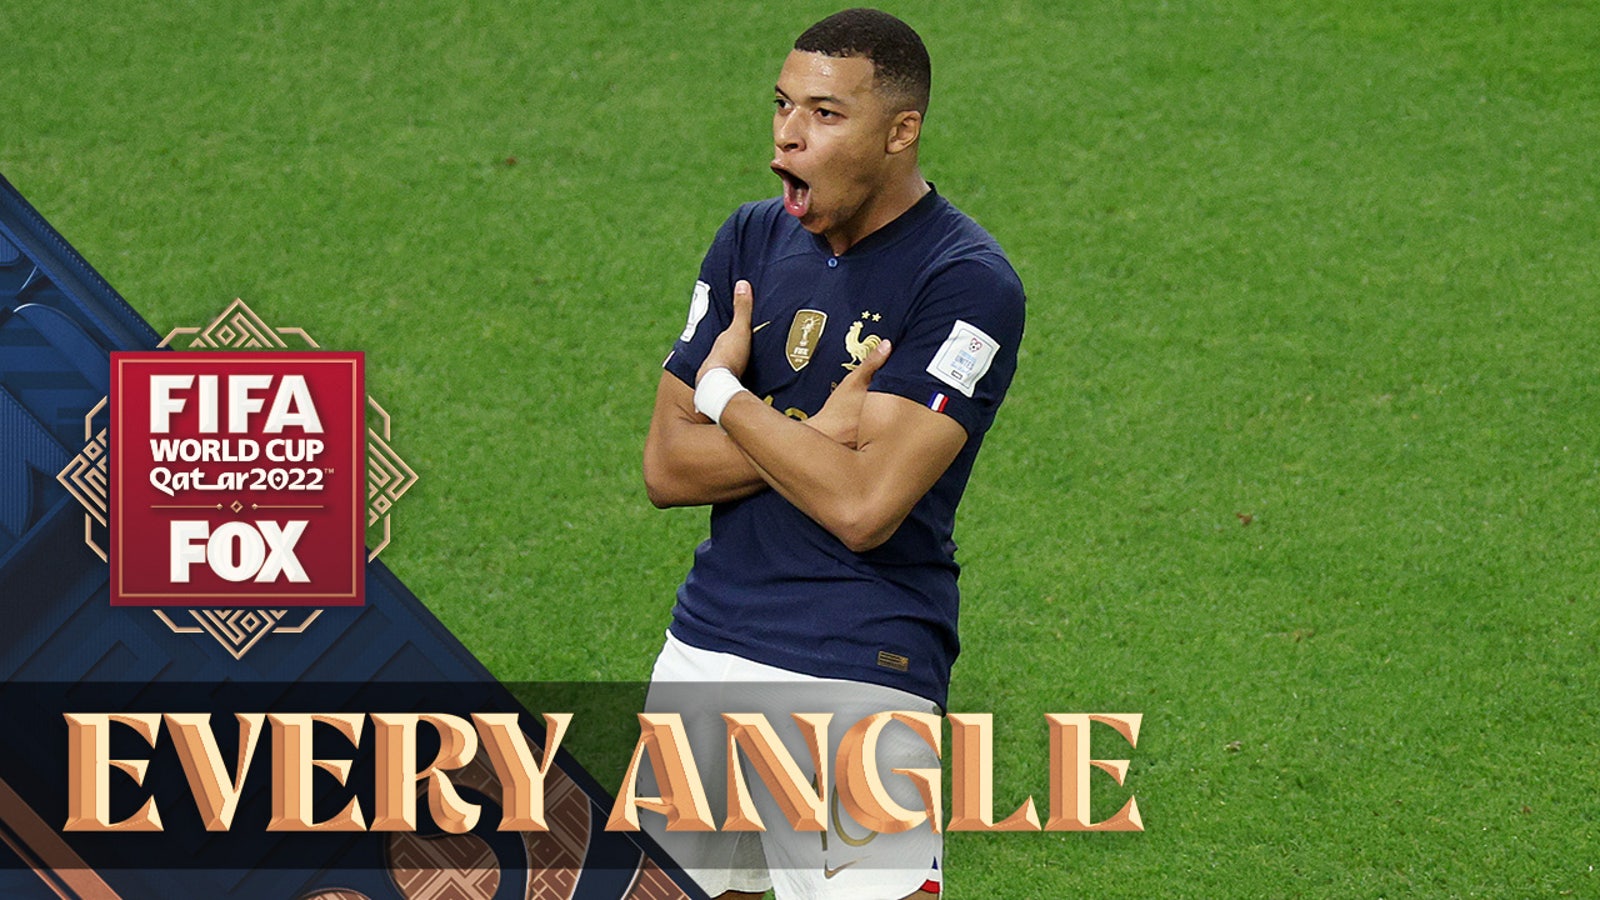 Kylian Mbappe turned superhuman for France, scored two goals against Poland | All angles